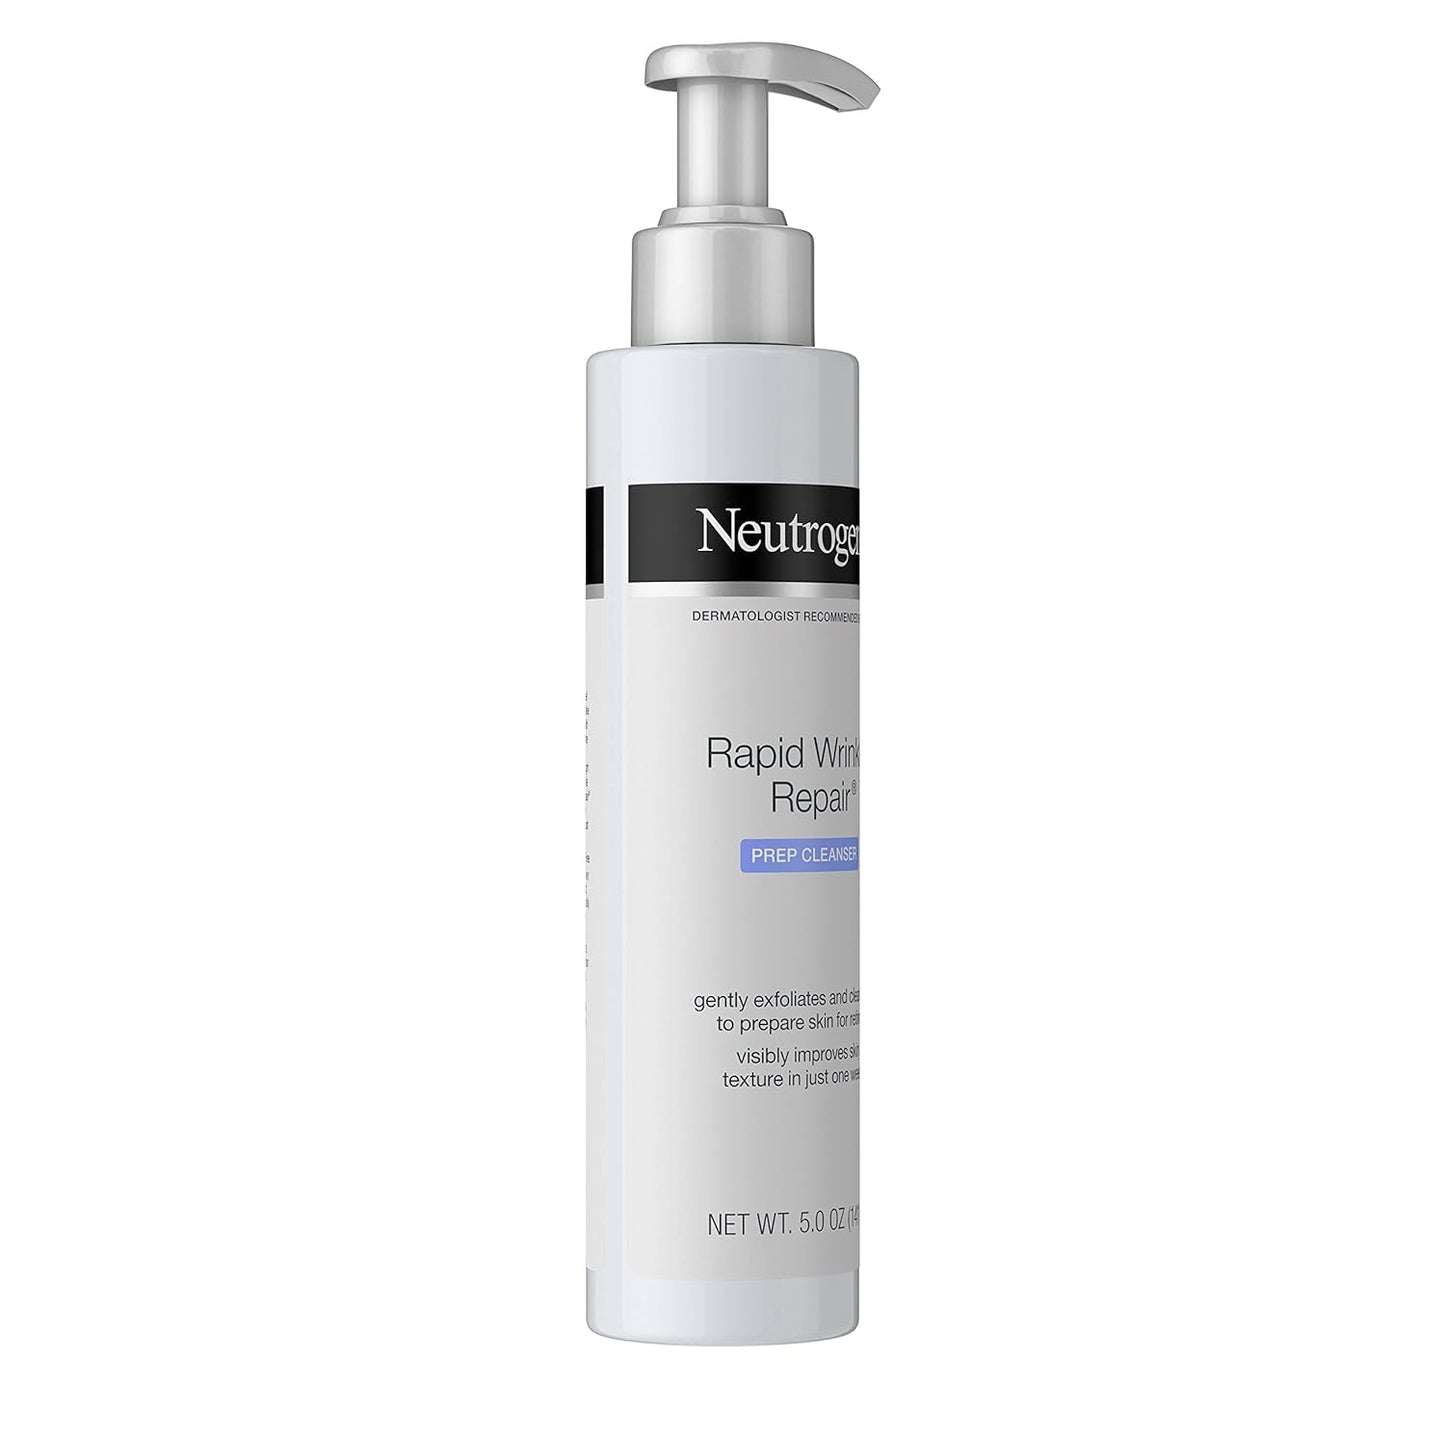 Neutrogena Rapid Wrinkle Repair Anti-Wrinkle Retinol Prep Facial Cream Cleanser with Glycolic Acid and Micro-Exfoliant to Gently Cleanse and Exfoliate Skin, Oil-Free and Non-Comedogenic, 5 oz